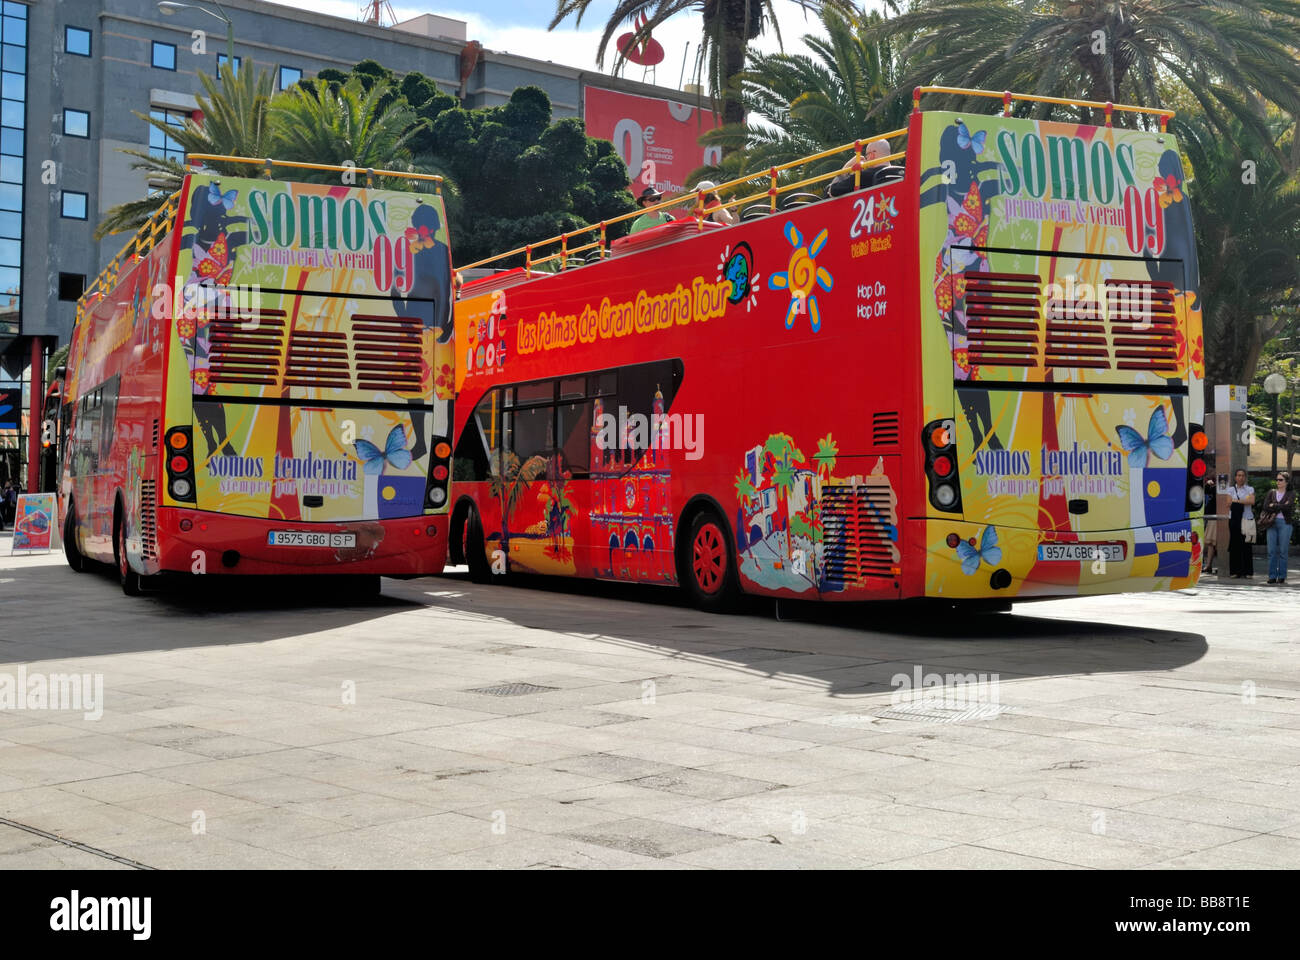 The open top sighteeing buses in the Parque Santa Catalina's bus stops. Las Palmas, Gran Canaria, Canary Islands, Spain, Europe. Stock Photo